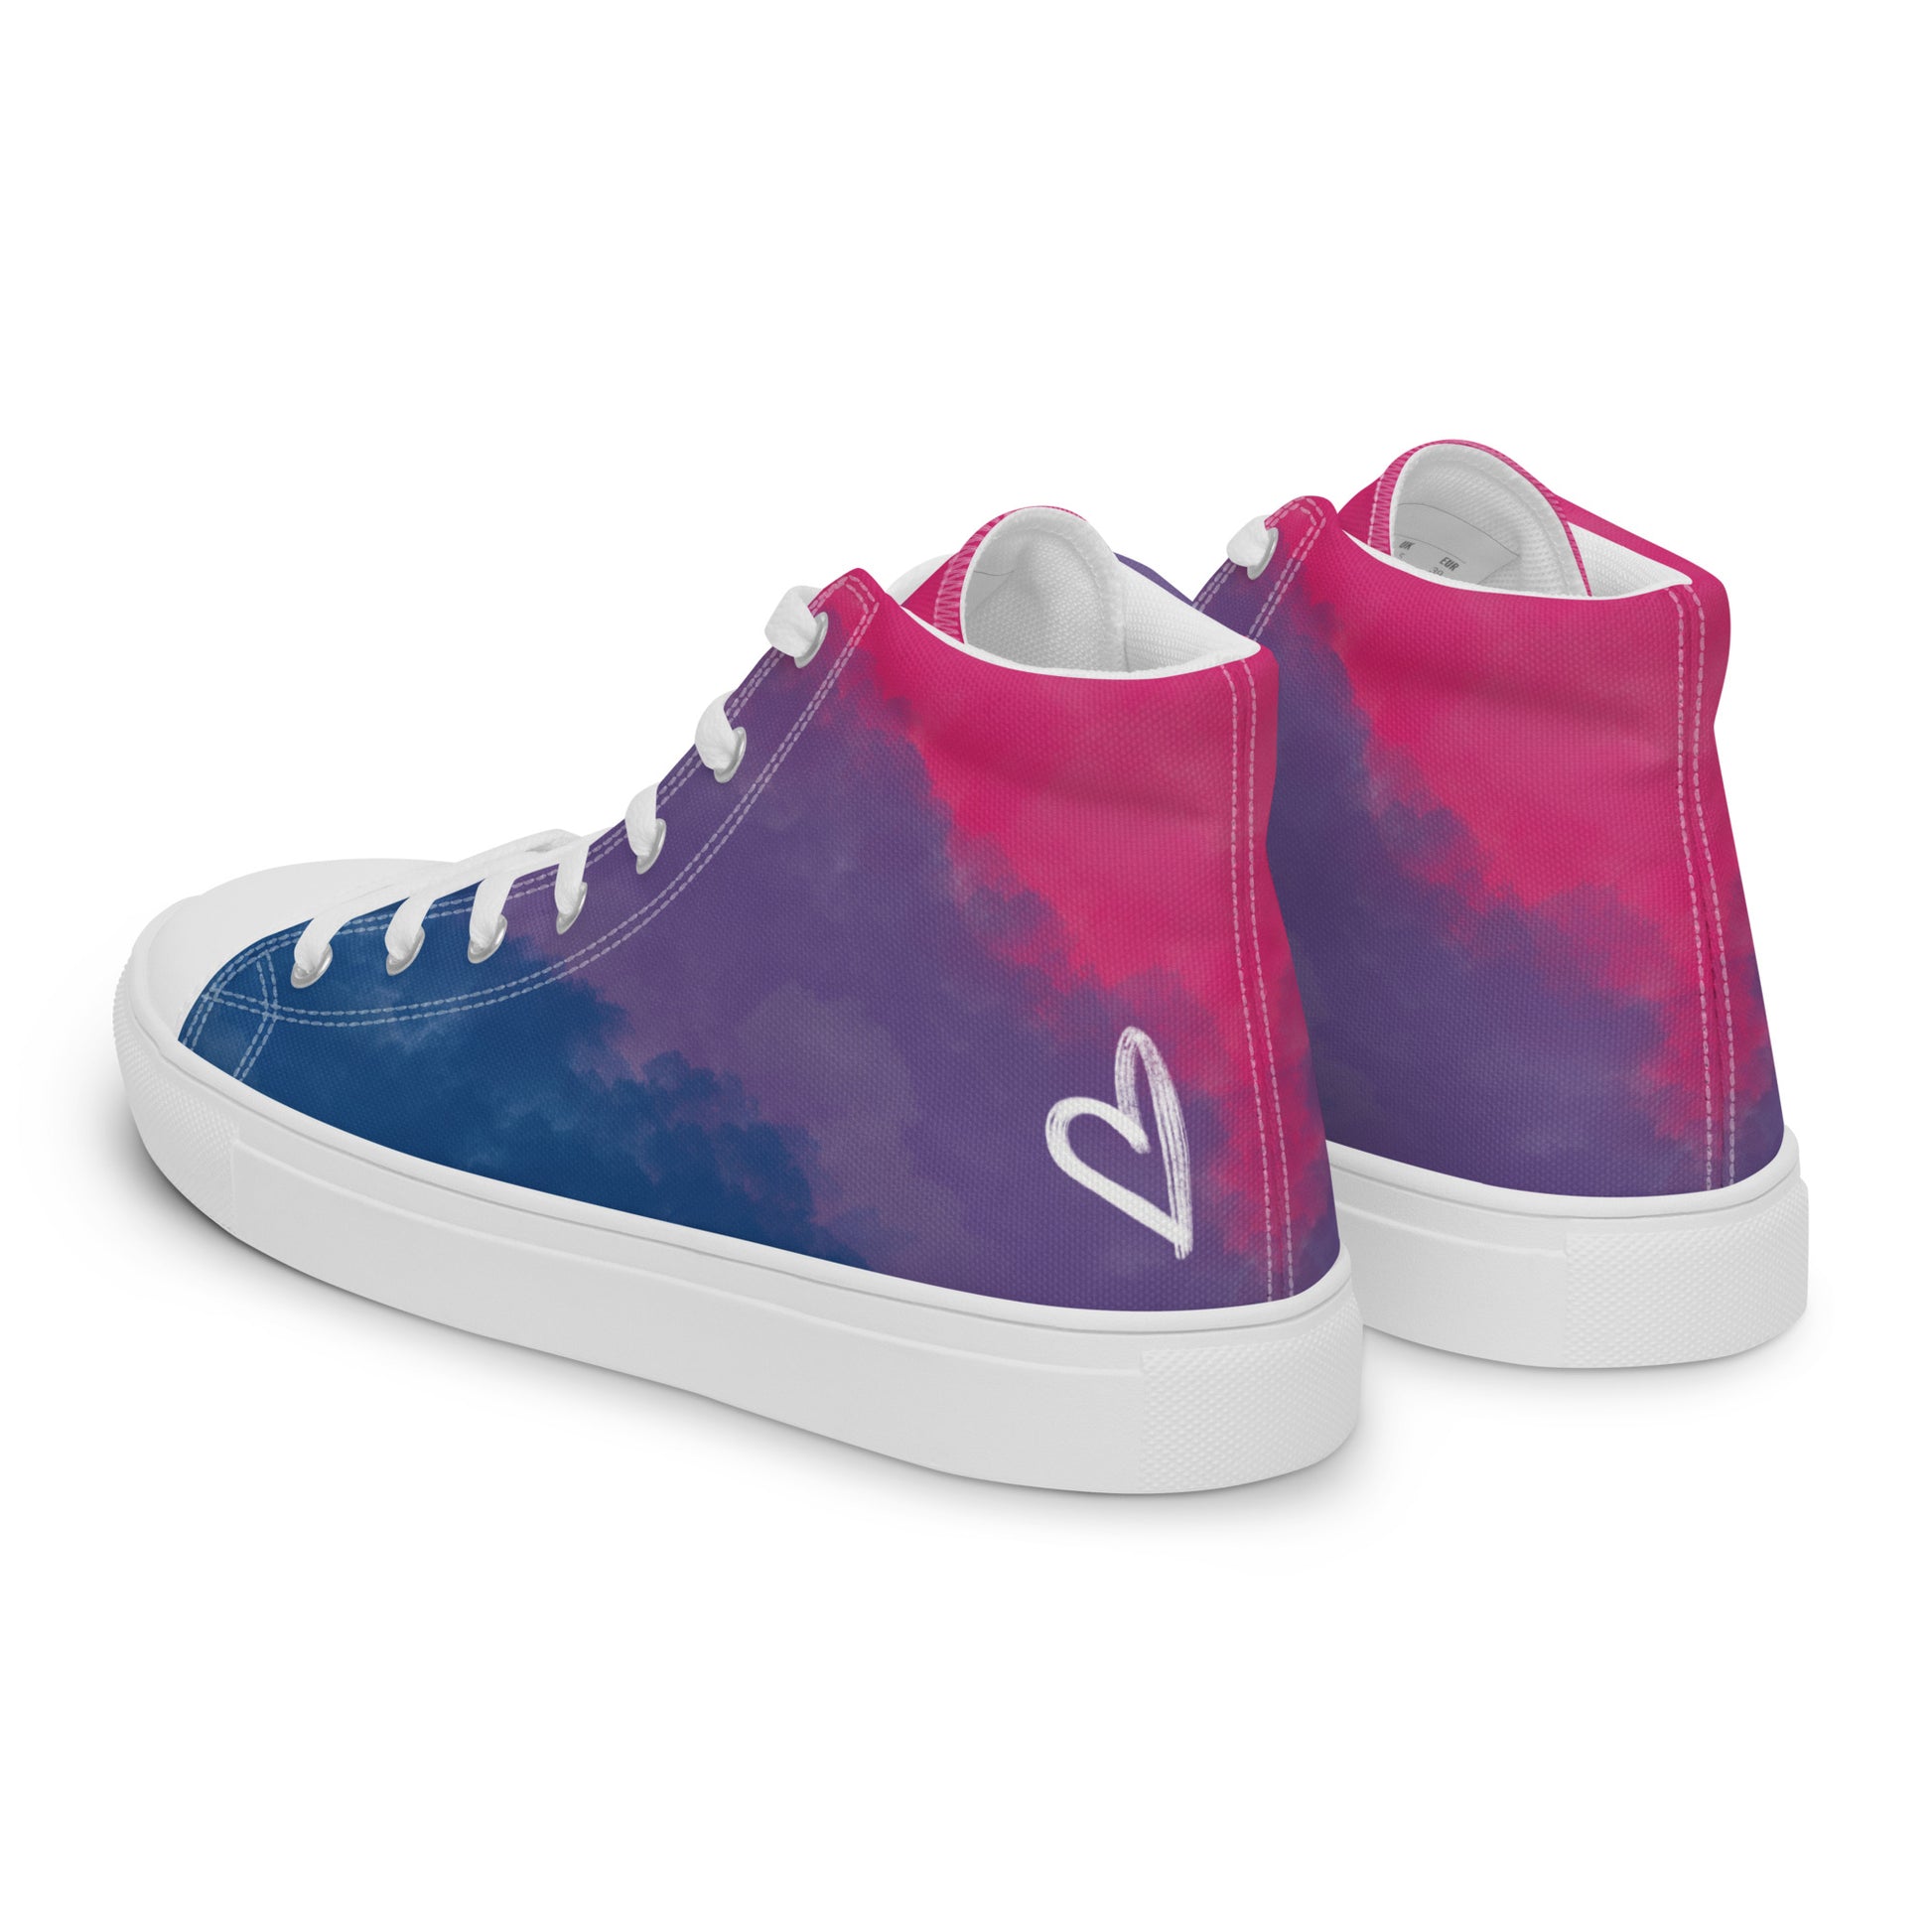 Left back view: a pair of high top shoes with color block pink, purple, and blue clouds, a white hand drawn heart, and the Aras Sivad logo on the back.